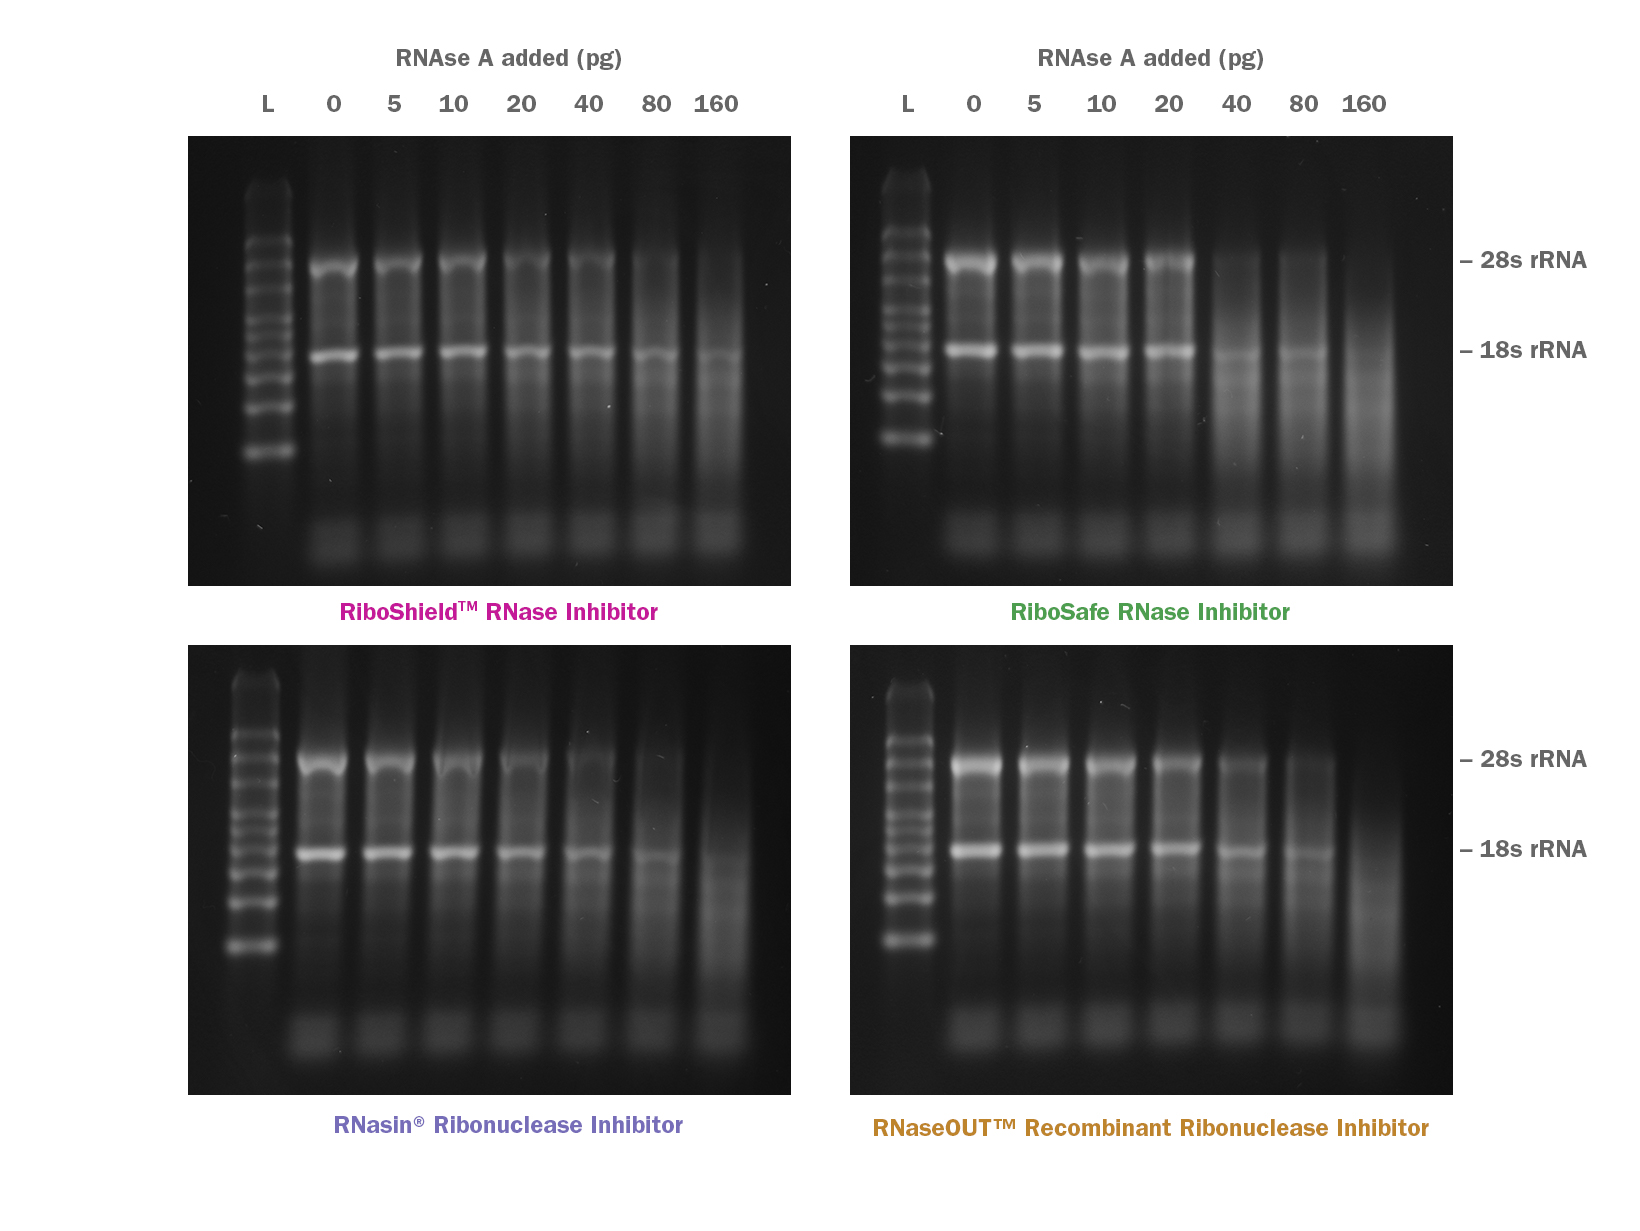 Gel images showing relative levels of RNA protection offered by RiboShield and competing RNase Inhibitors to RNase A degradation